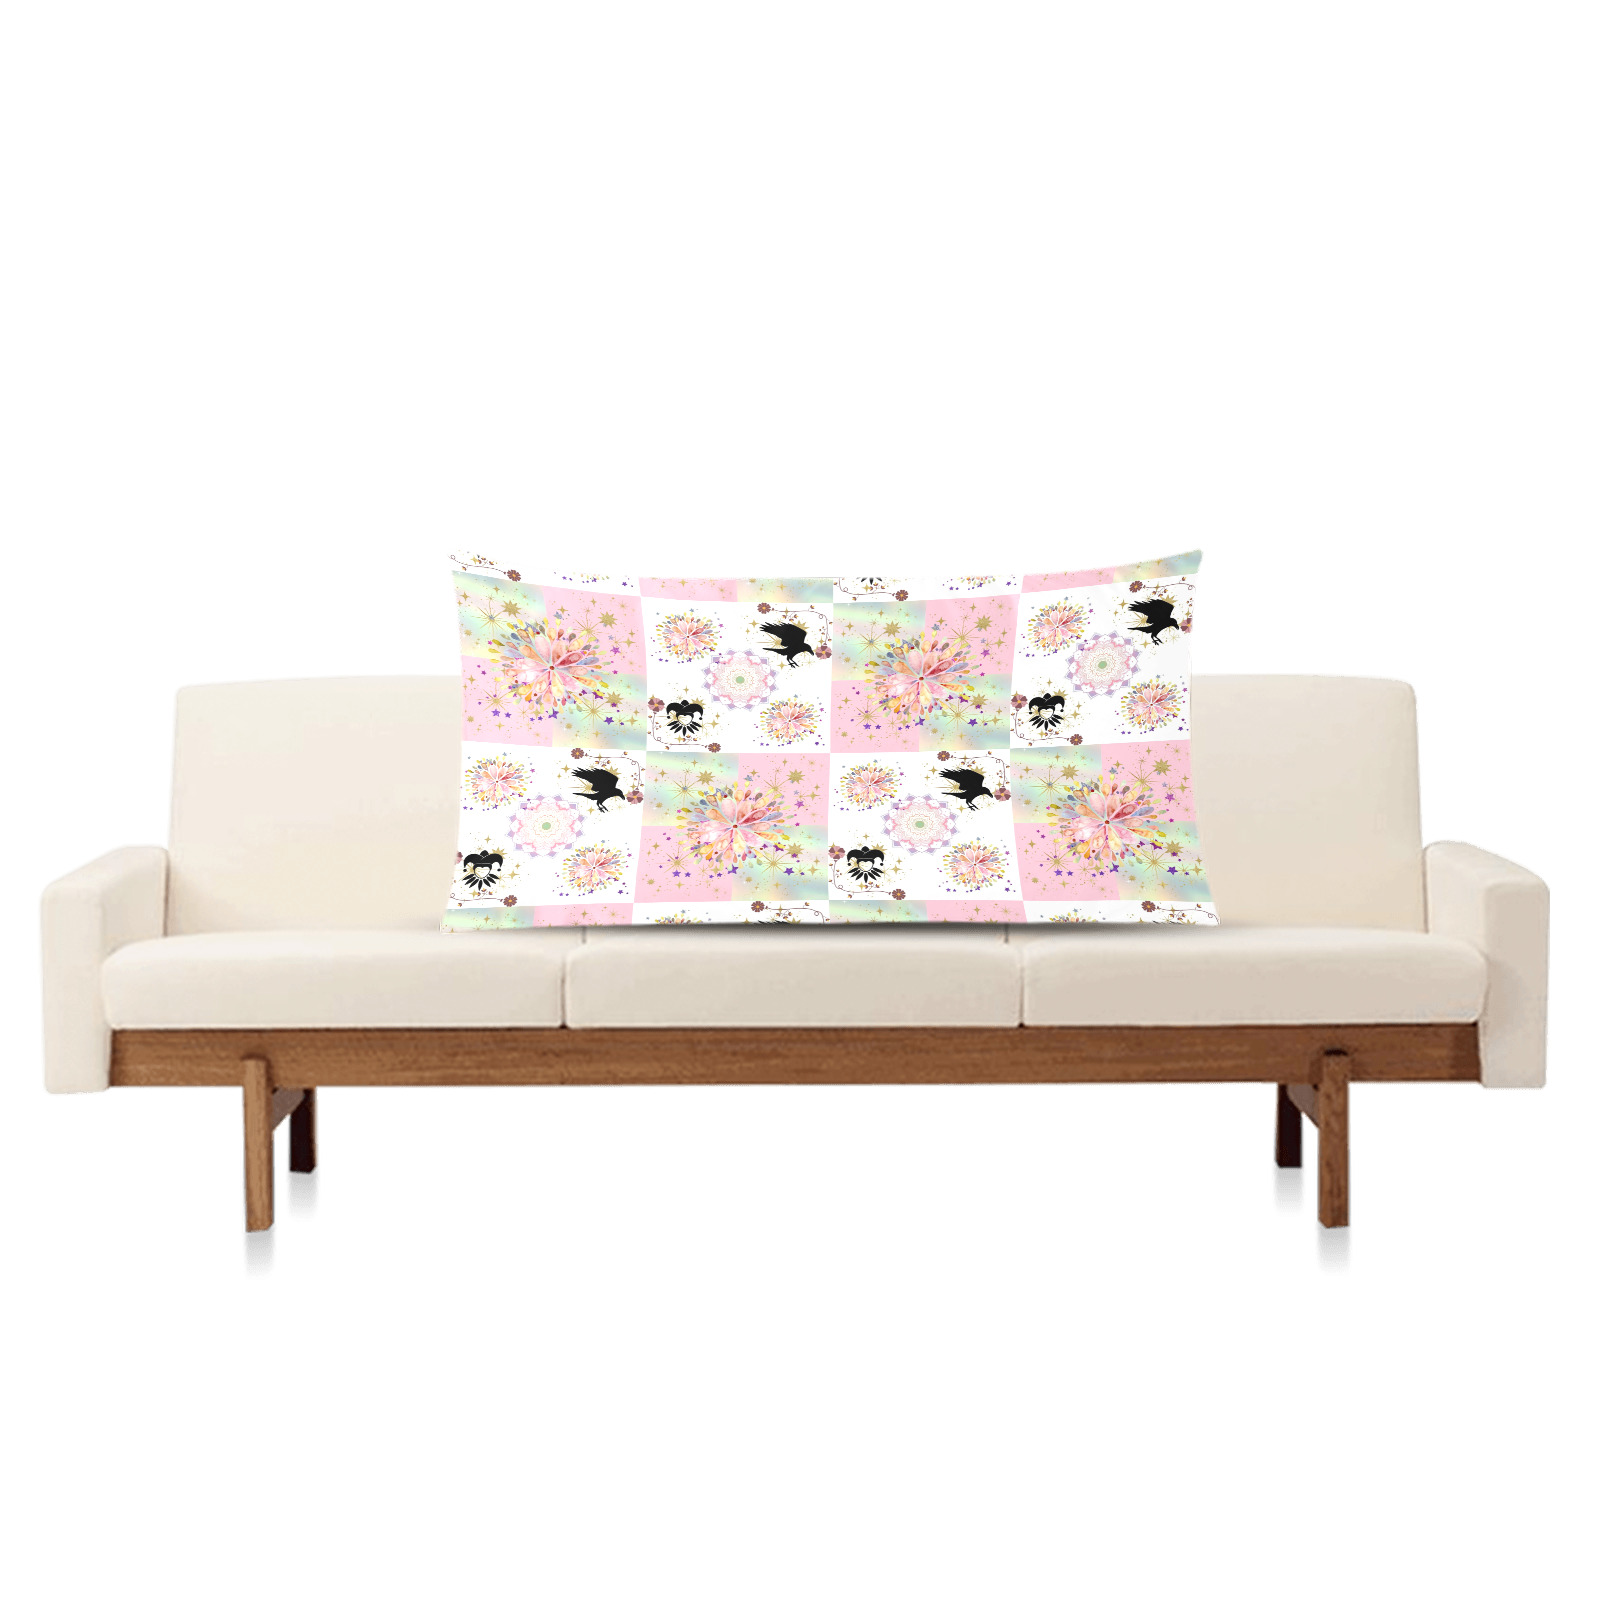 Secret Garden With Harlequin and Crow Patch Artwork Rectangle Pillow Case 20"x36"(Twin Sides)